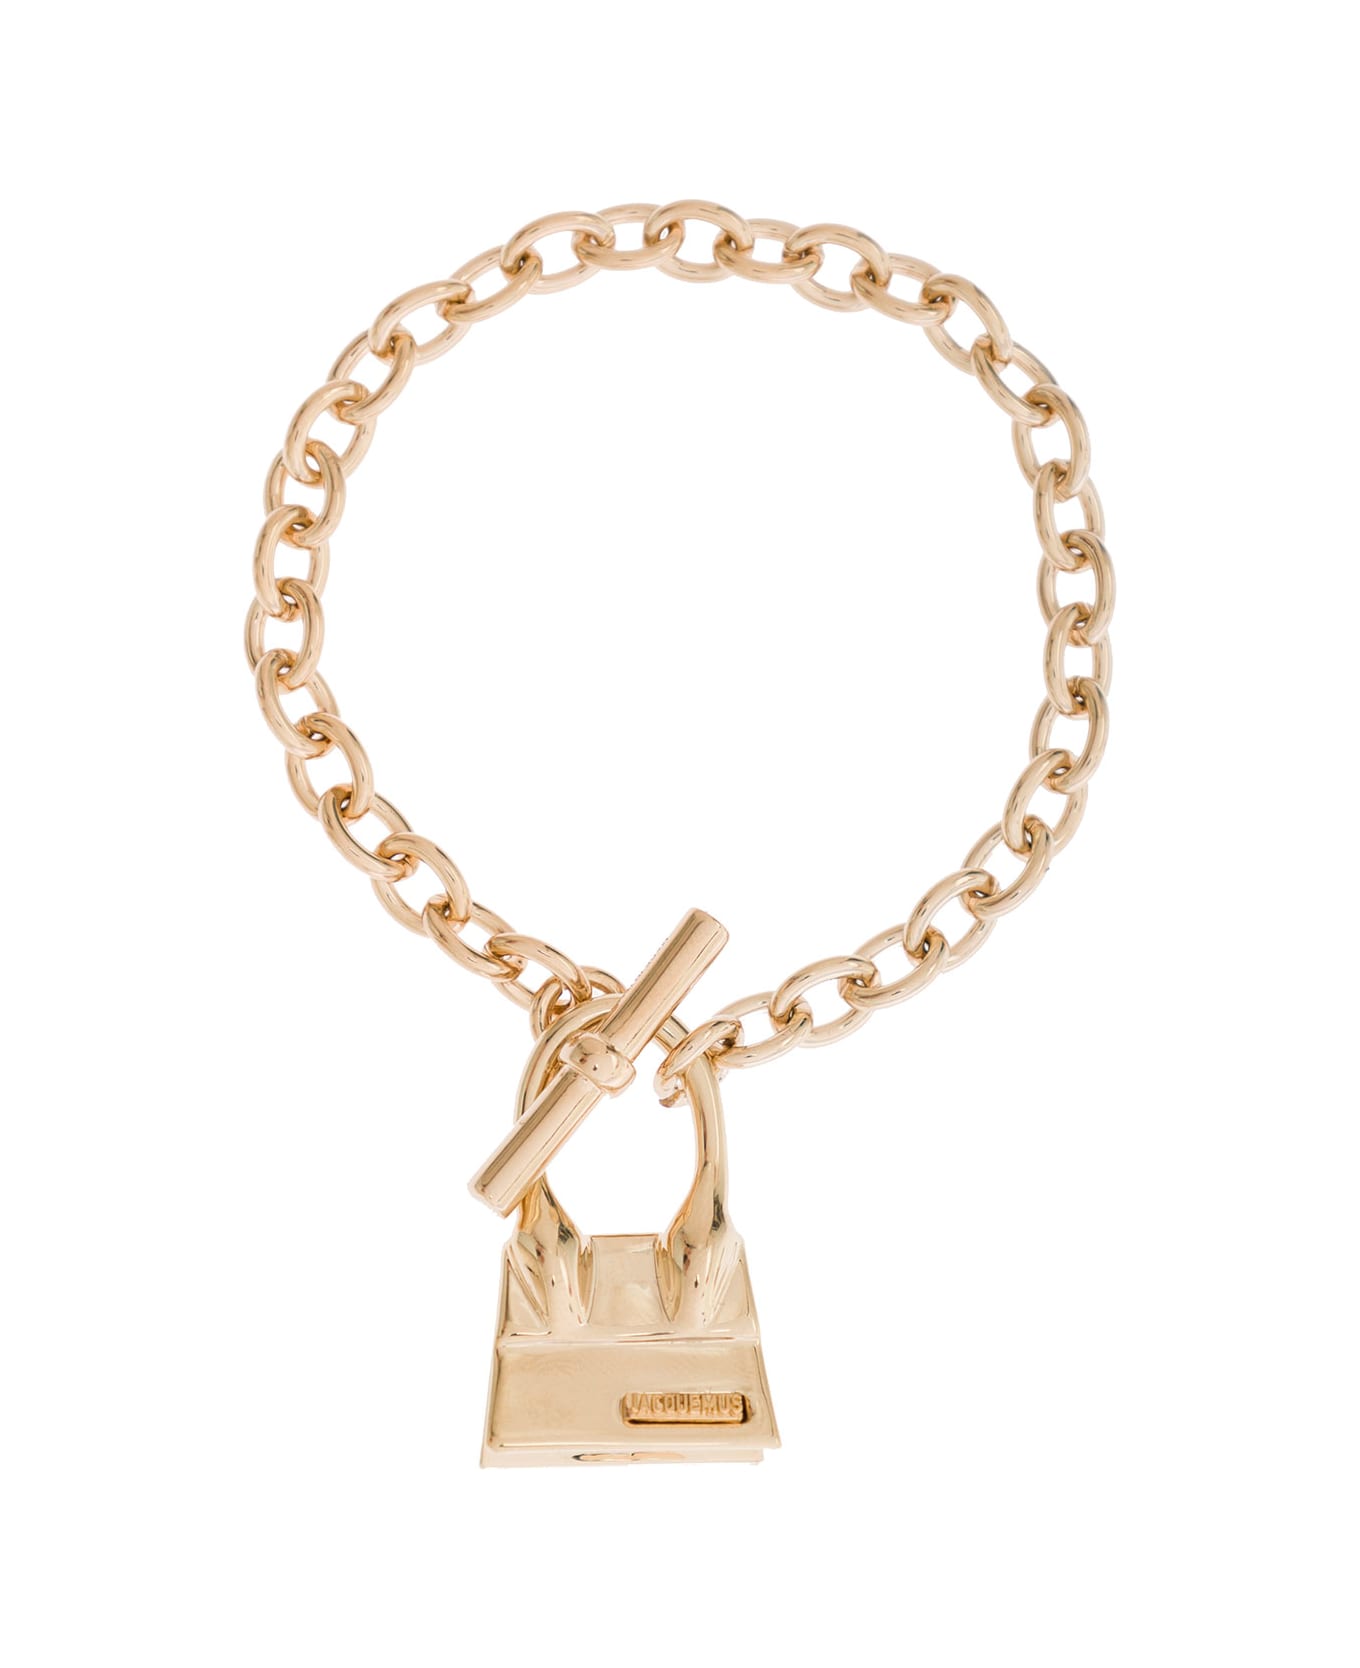 Jacquemus Chain Bracelet With Chiquito Charm - LIGHT GOLD ブレスレット